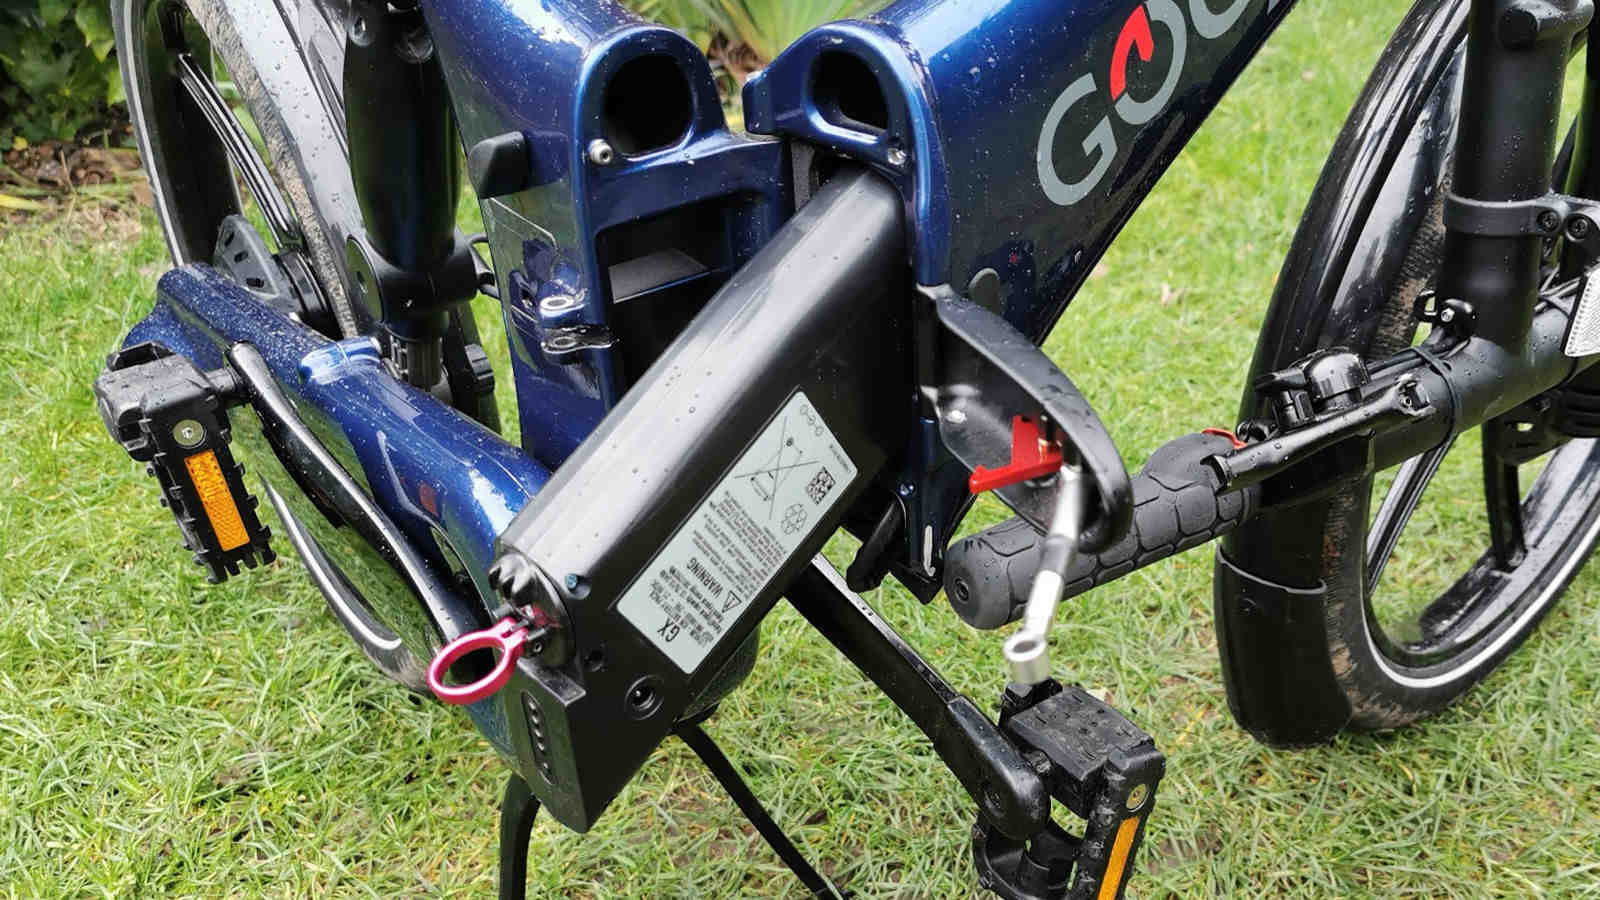 How far can an electric bike go on one charge?